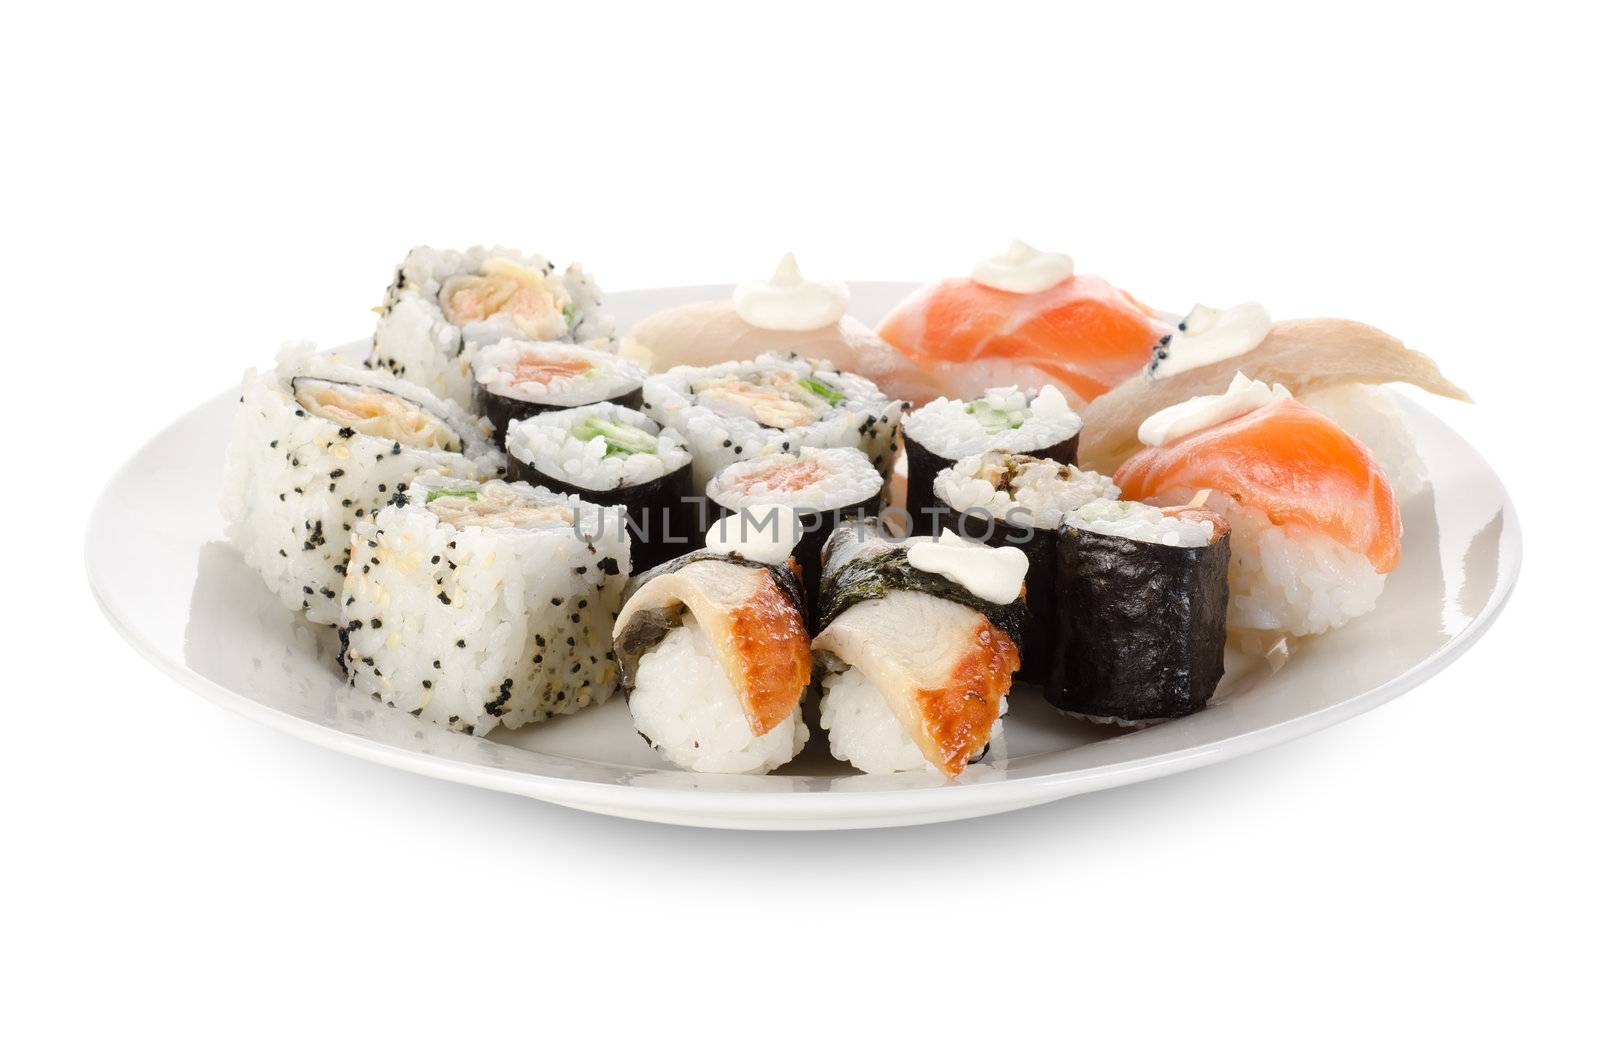 Sushi and rolls in a dishes by Givaga